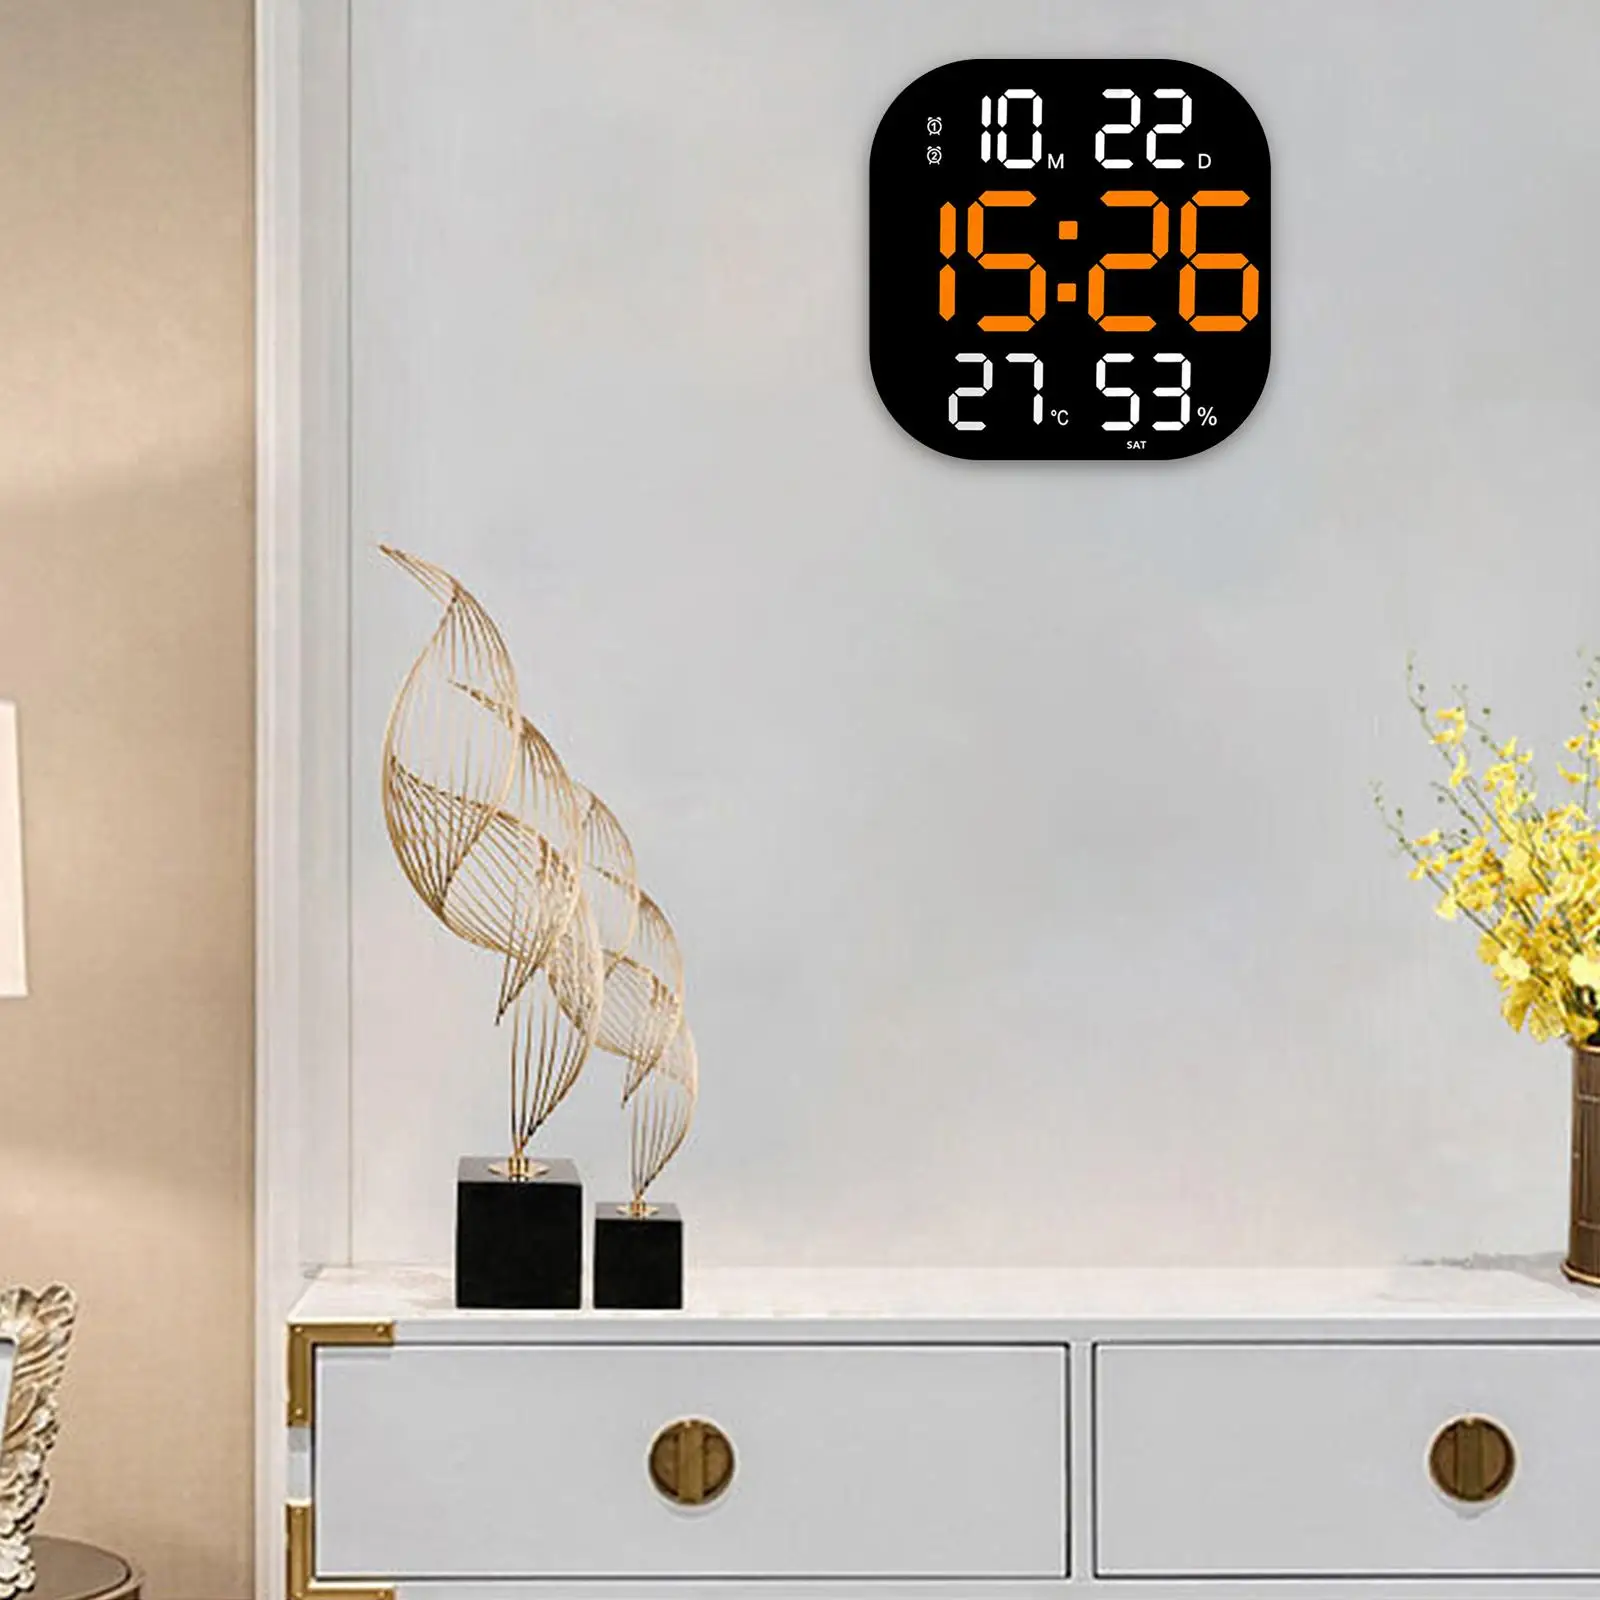 Digital Wall Clock Large Screen Temperature Month Date Display Silent Electronic Alarm Clock for Bedroom Living Room